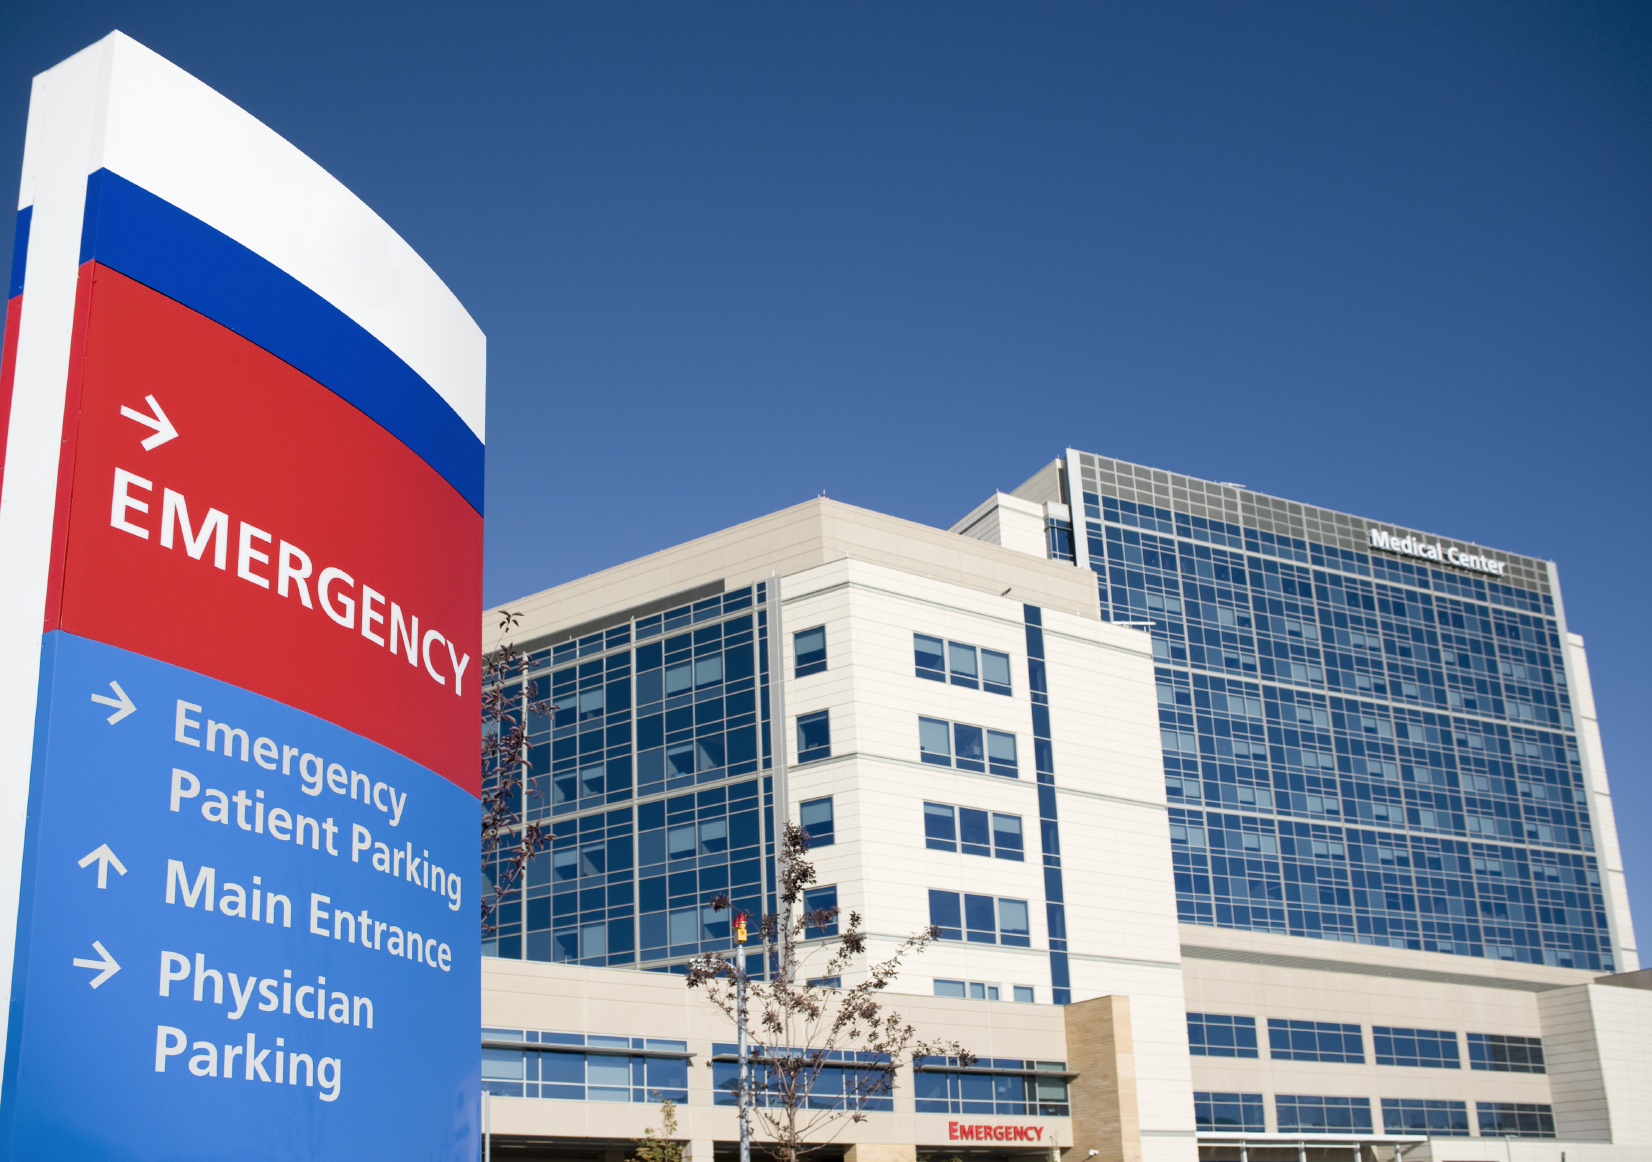 best er hospitals in the us